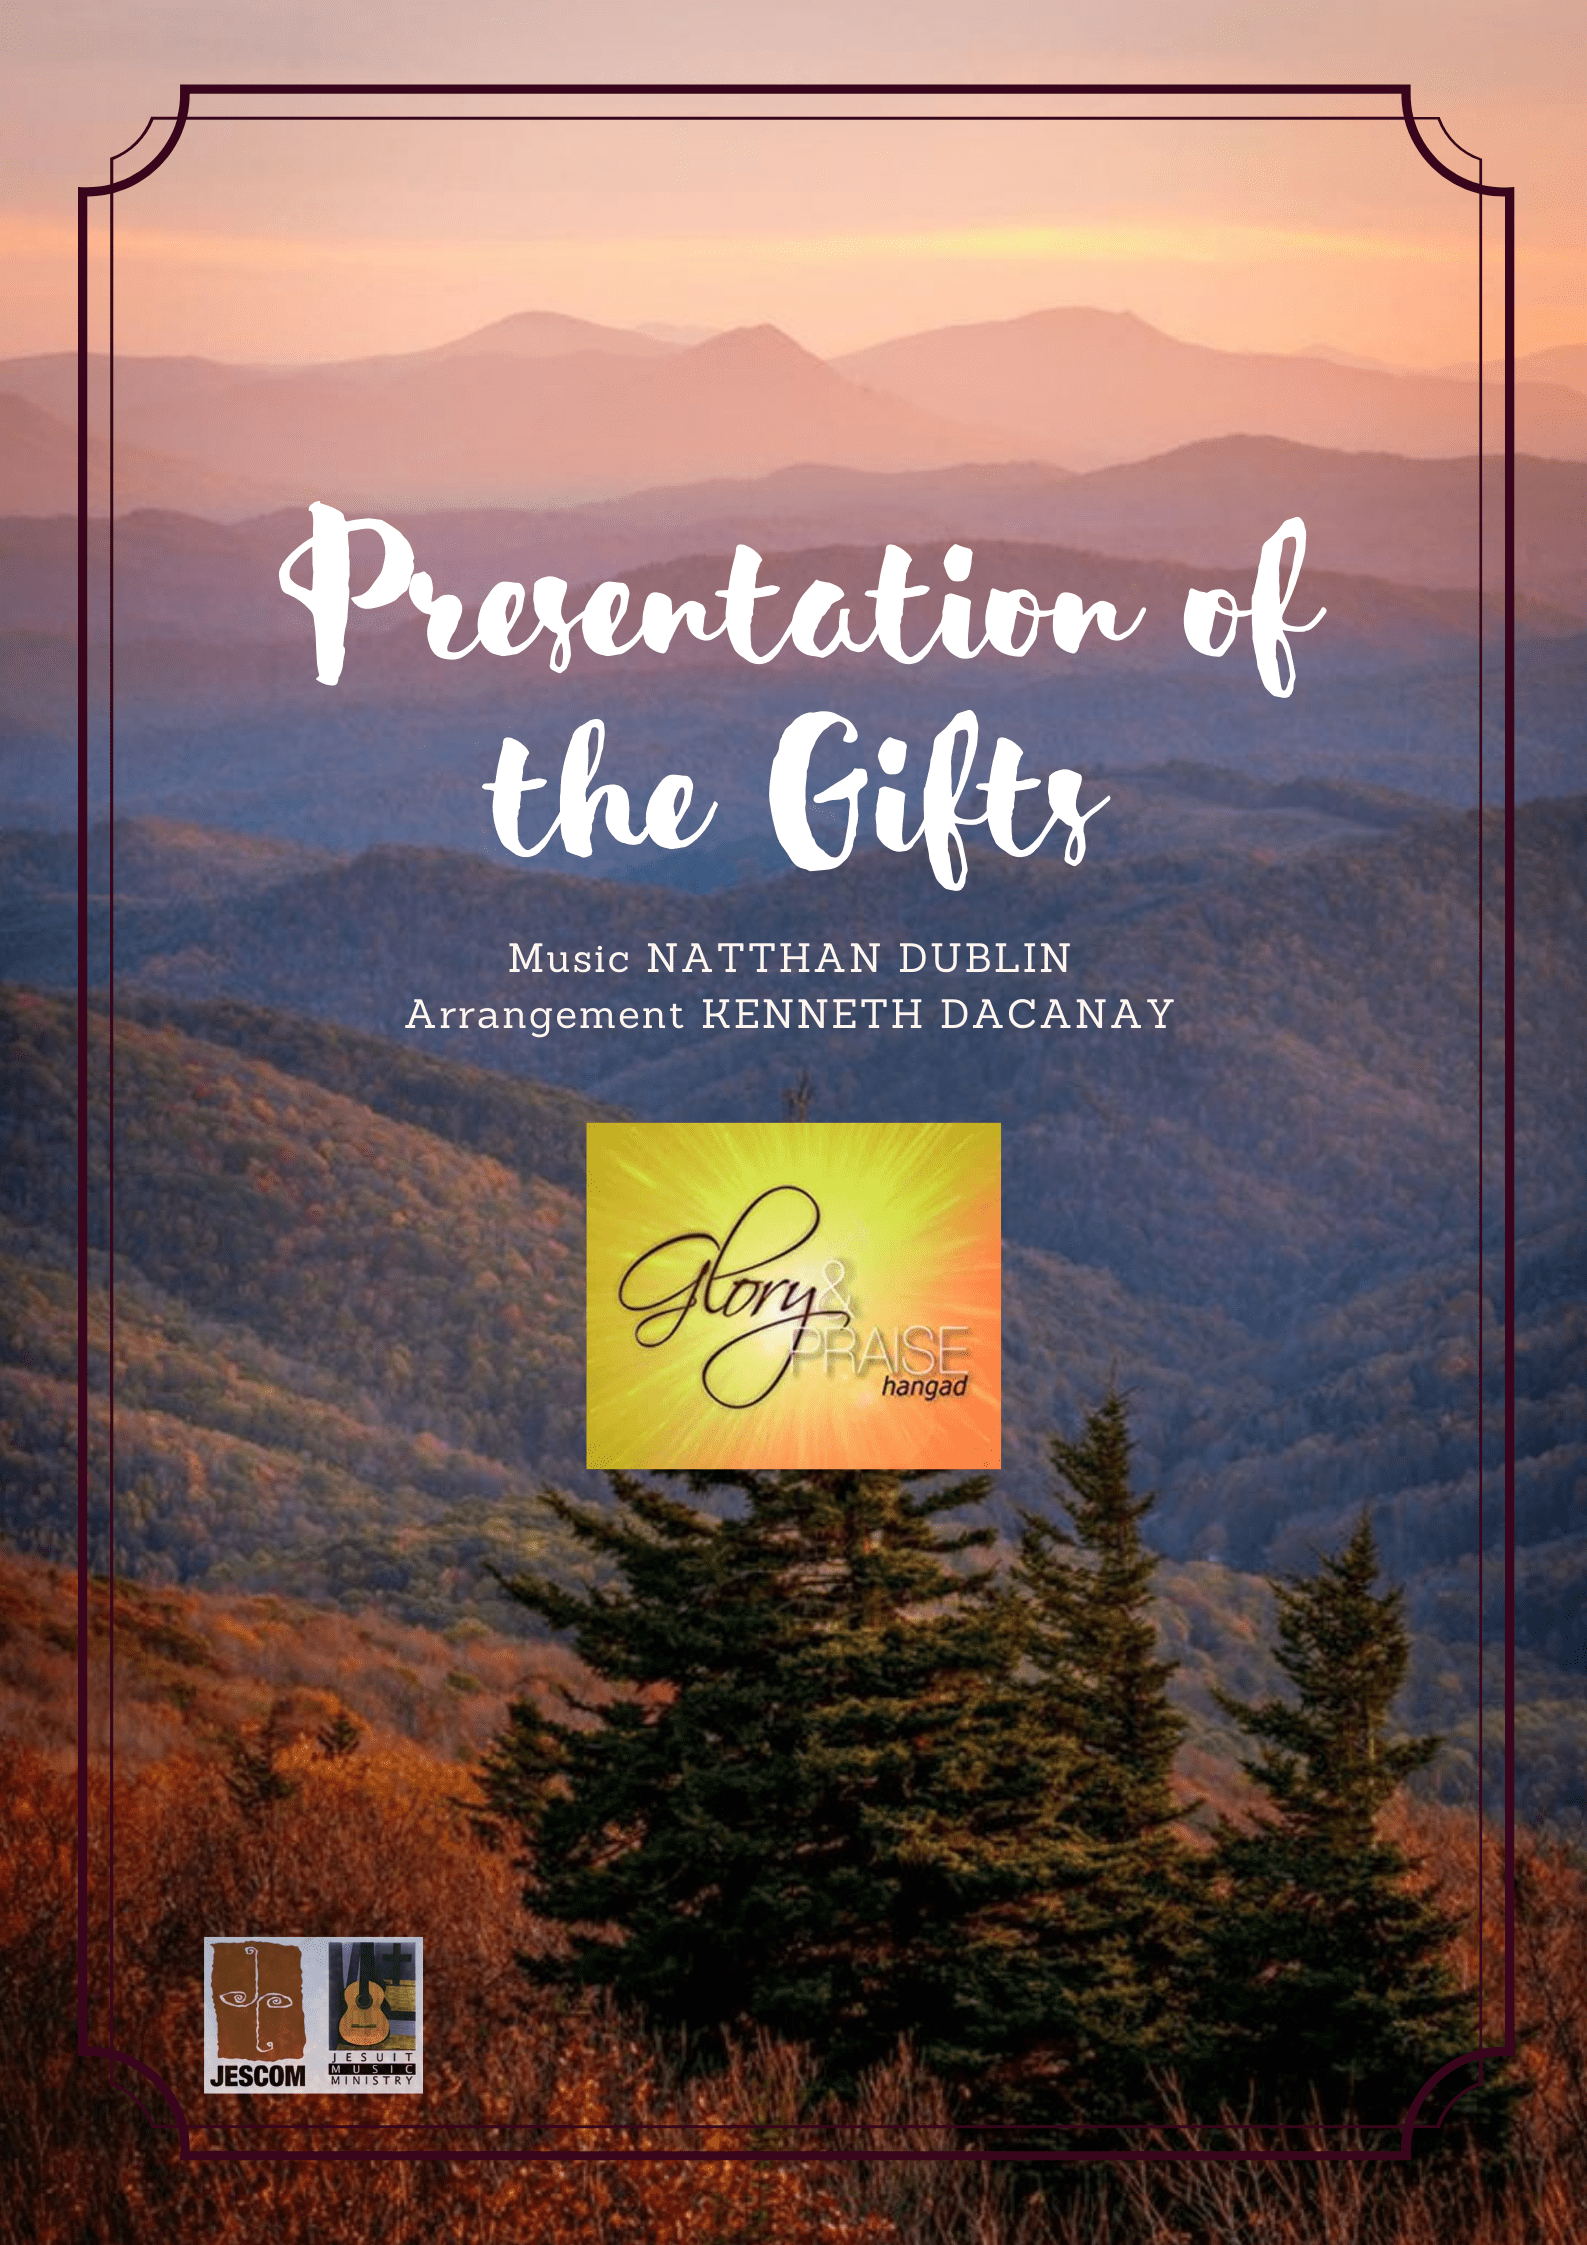 catholic presentation of the gifts songs